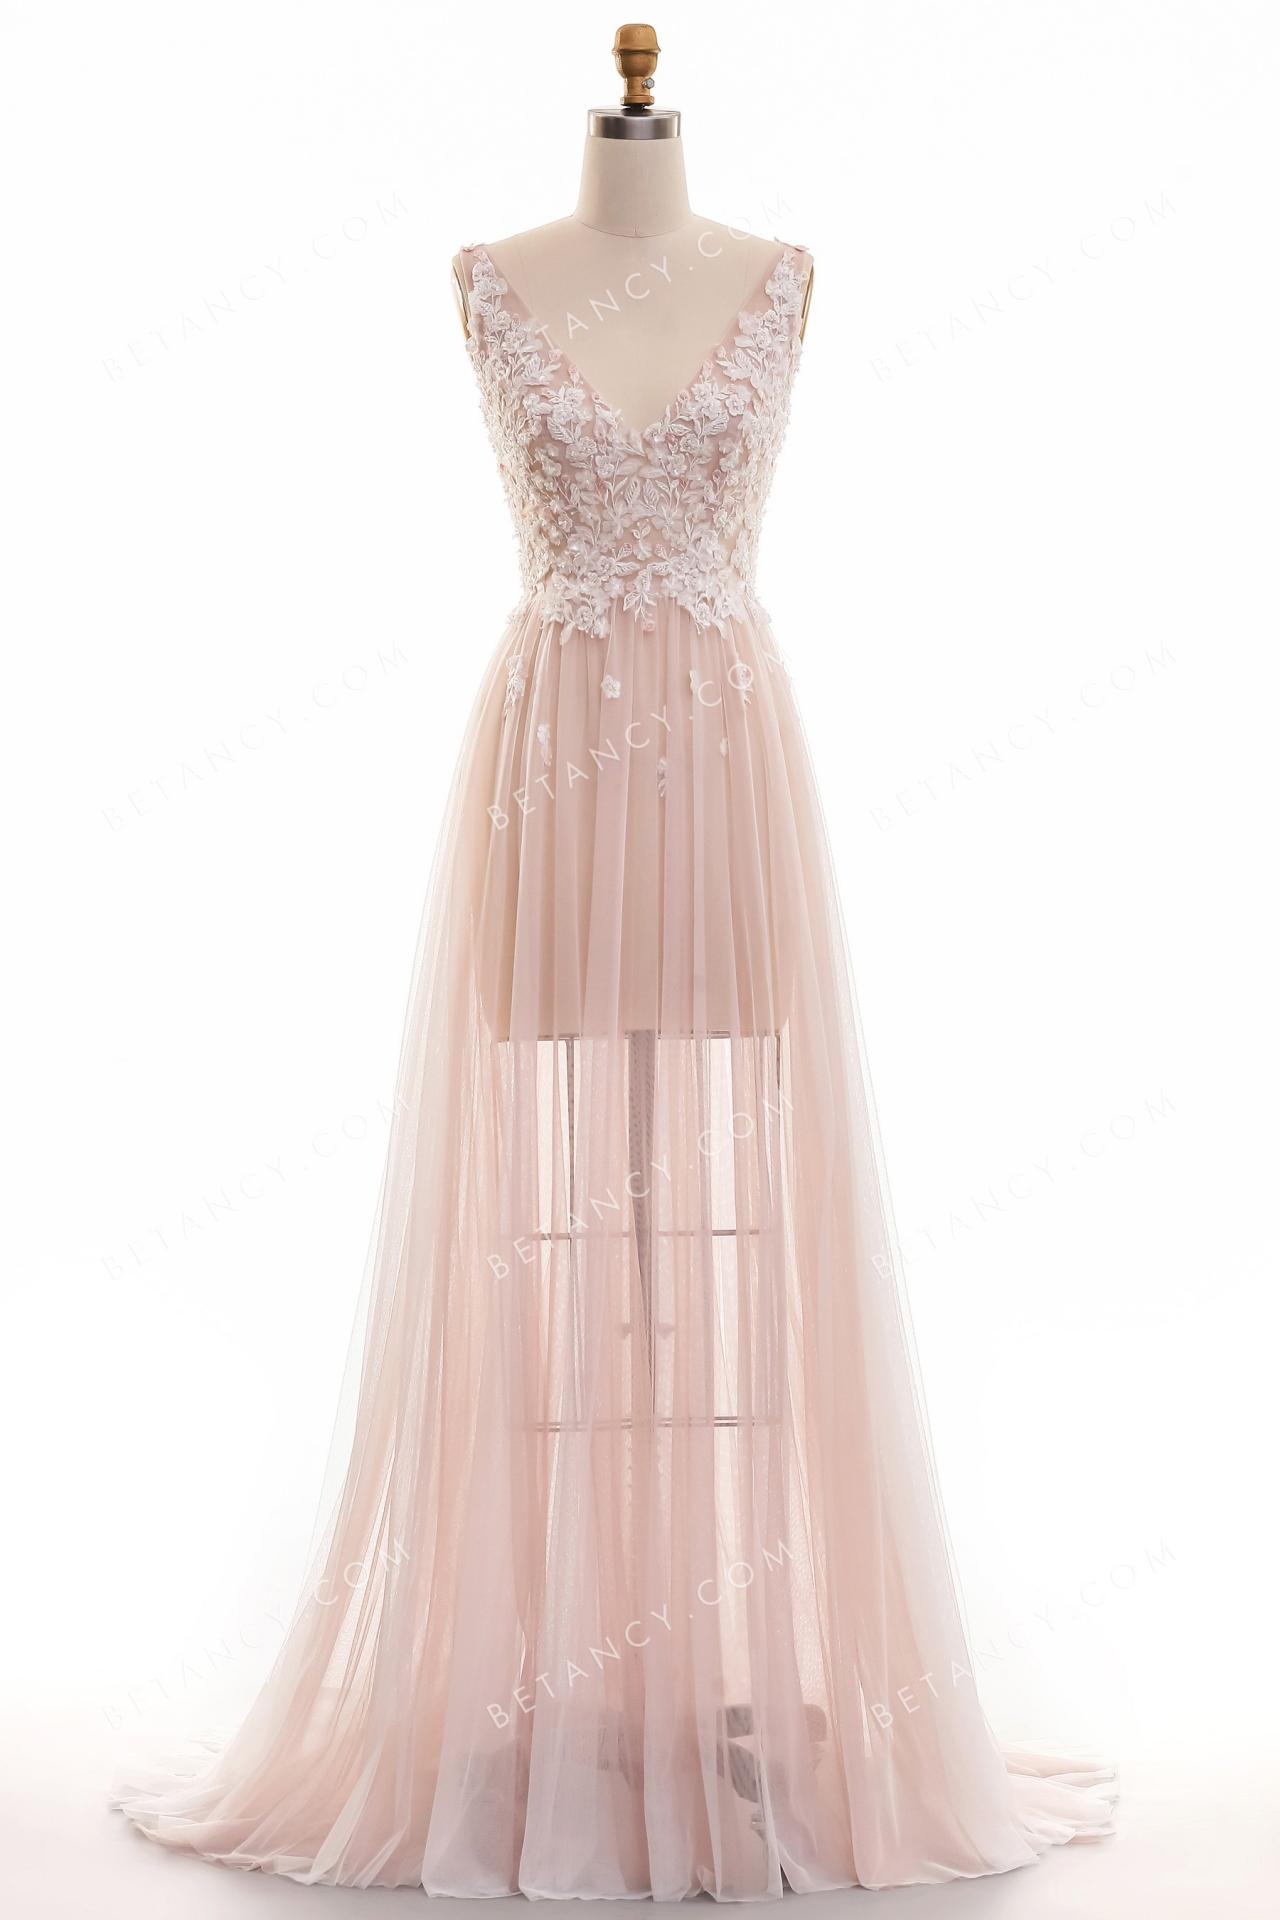 Dusty rose sheer soft tulle a line wedding dress 4